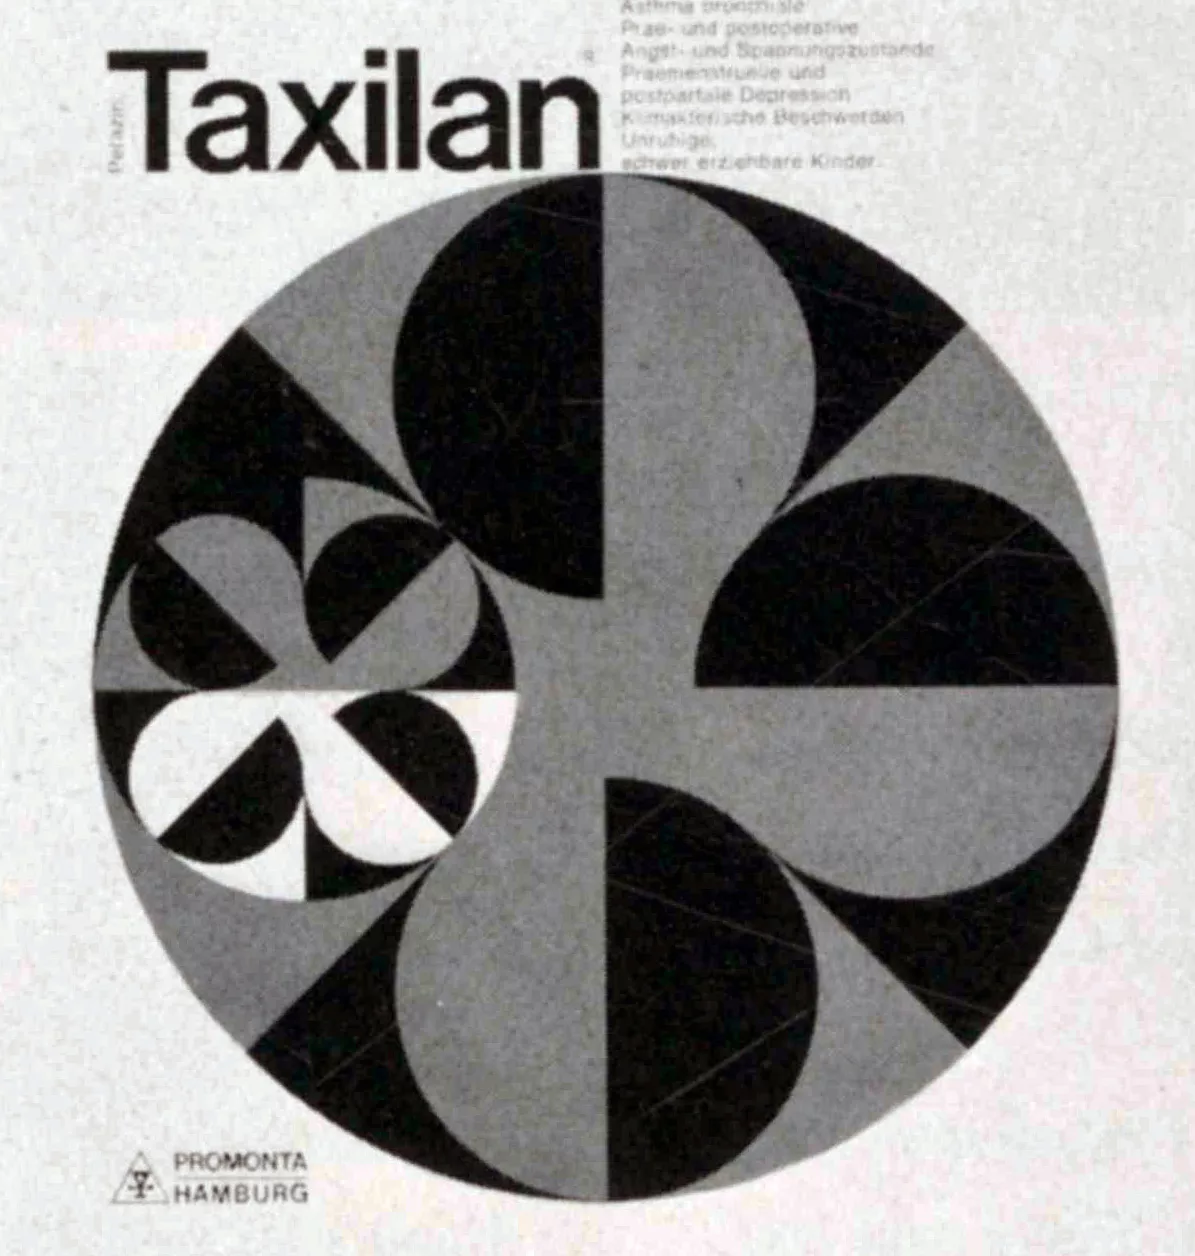 Taxilan Adverisment designed by Atelier Theo Häussler